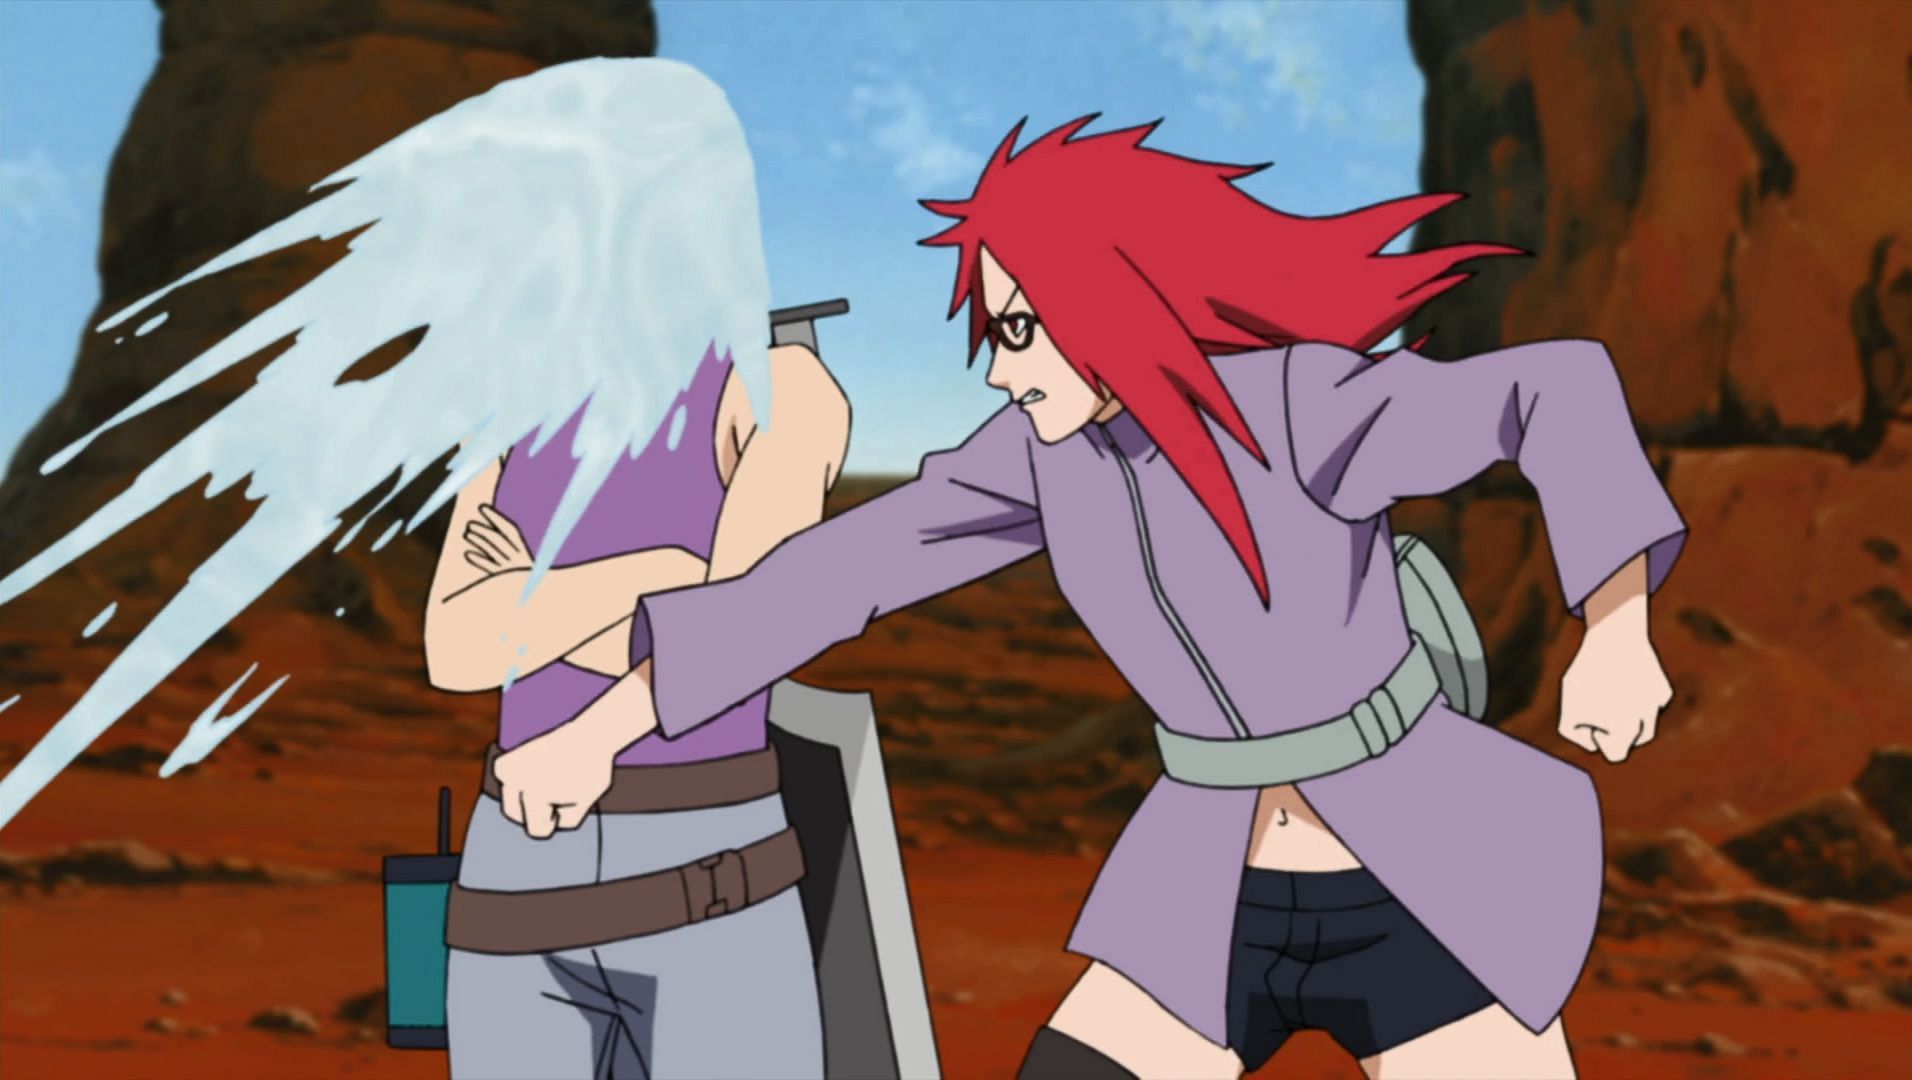 The perfect image to describe Suigetsu and Karin as a couple (Image via Studio Pierrot)